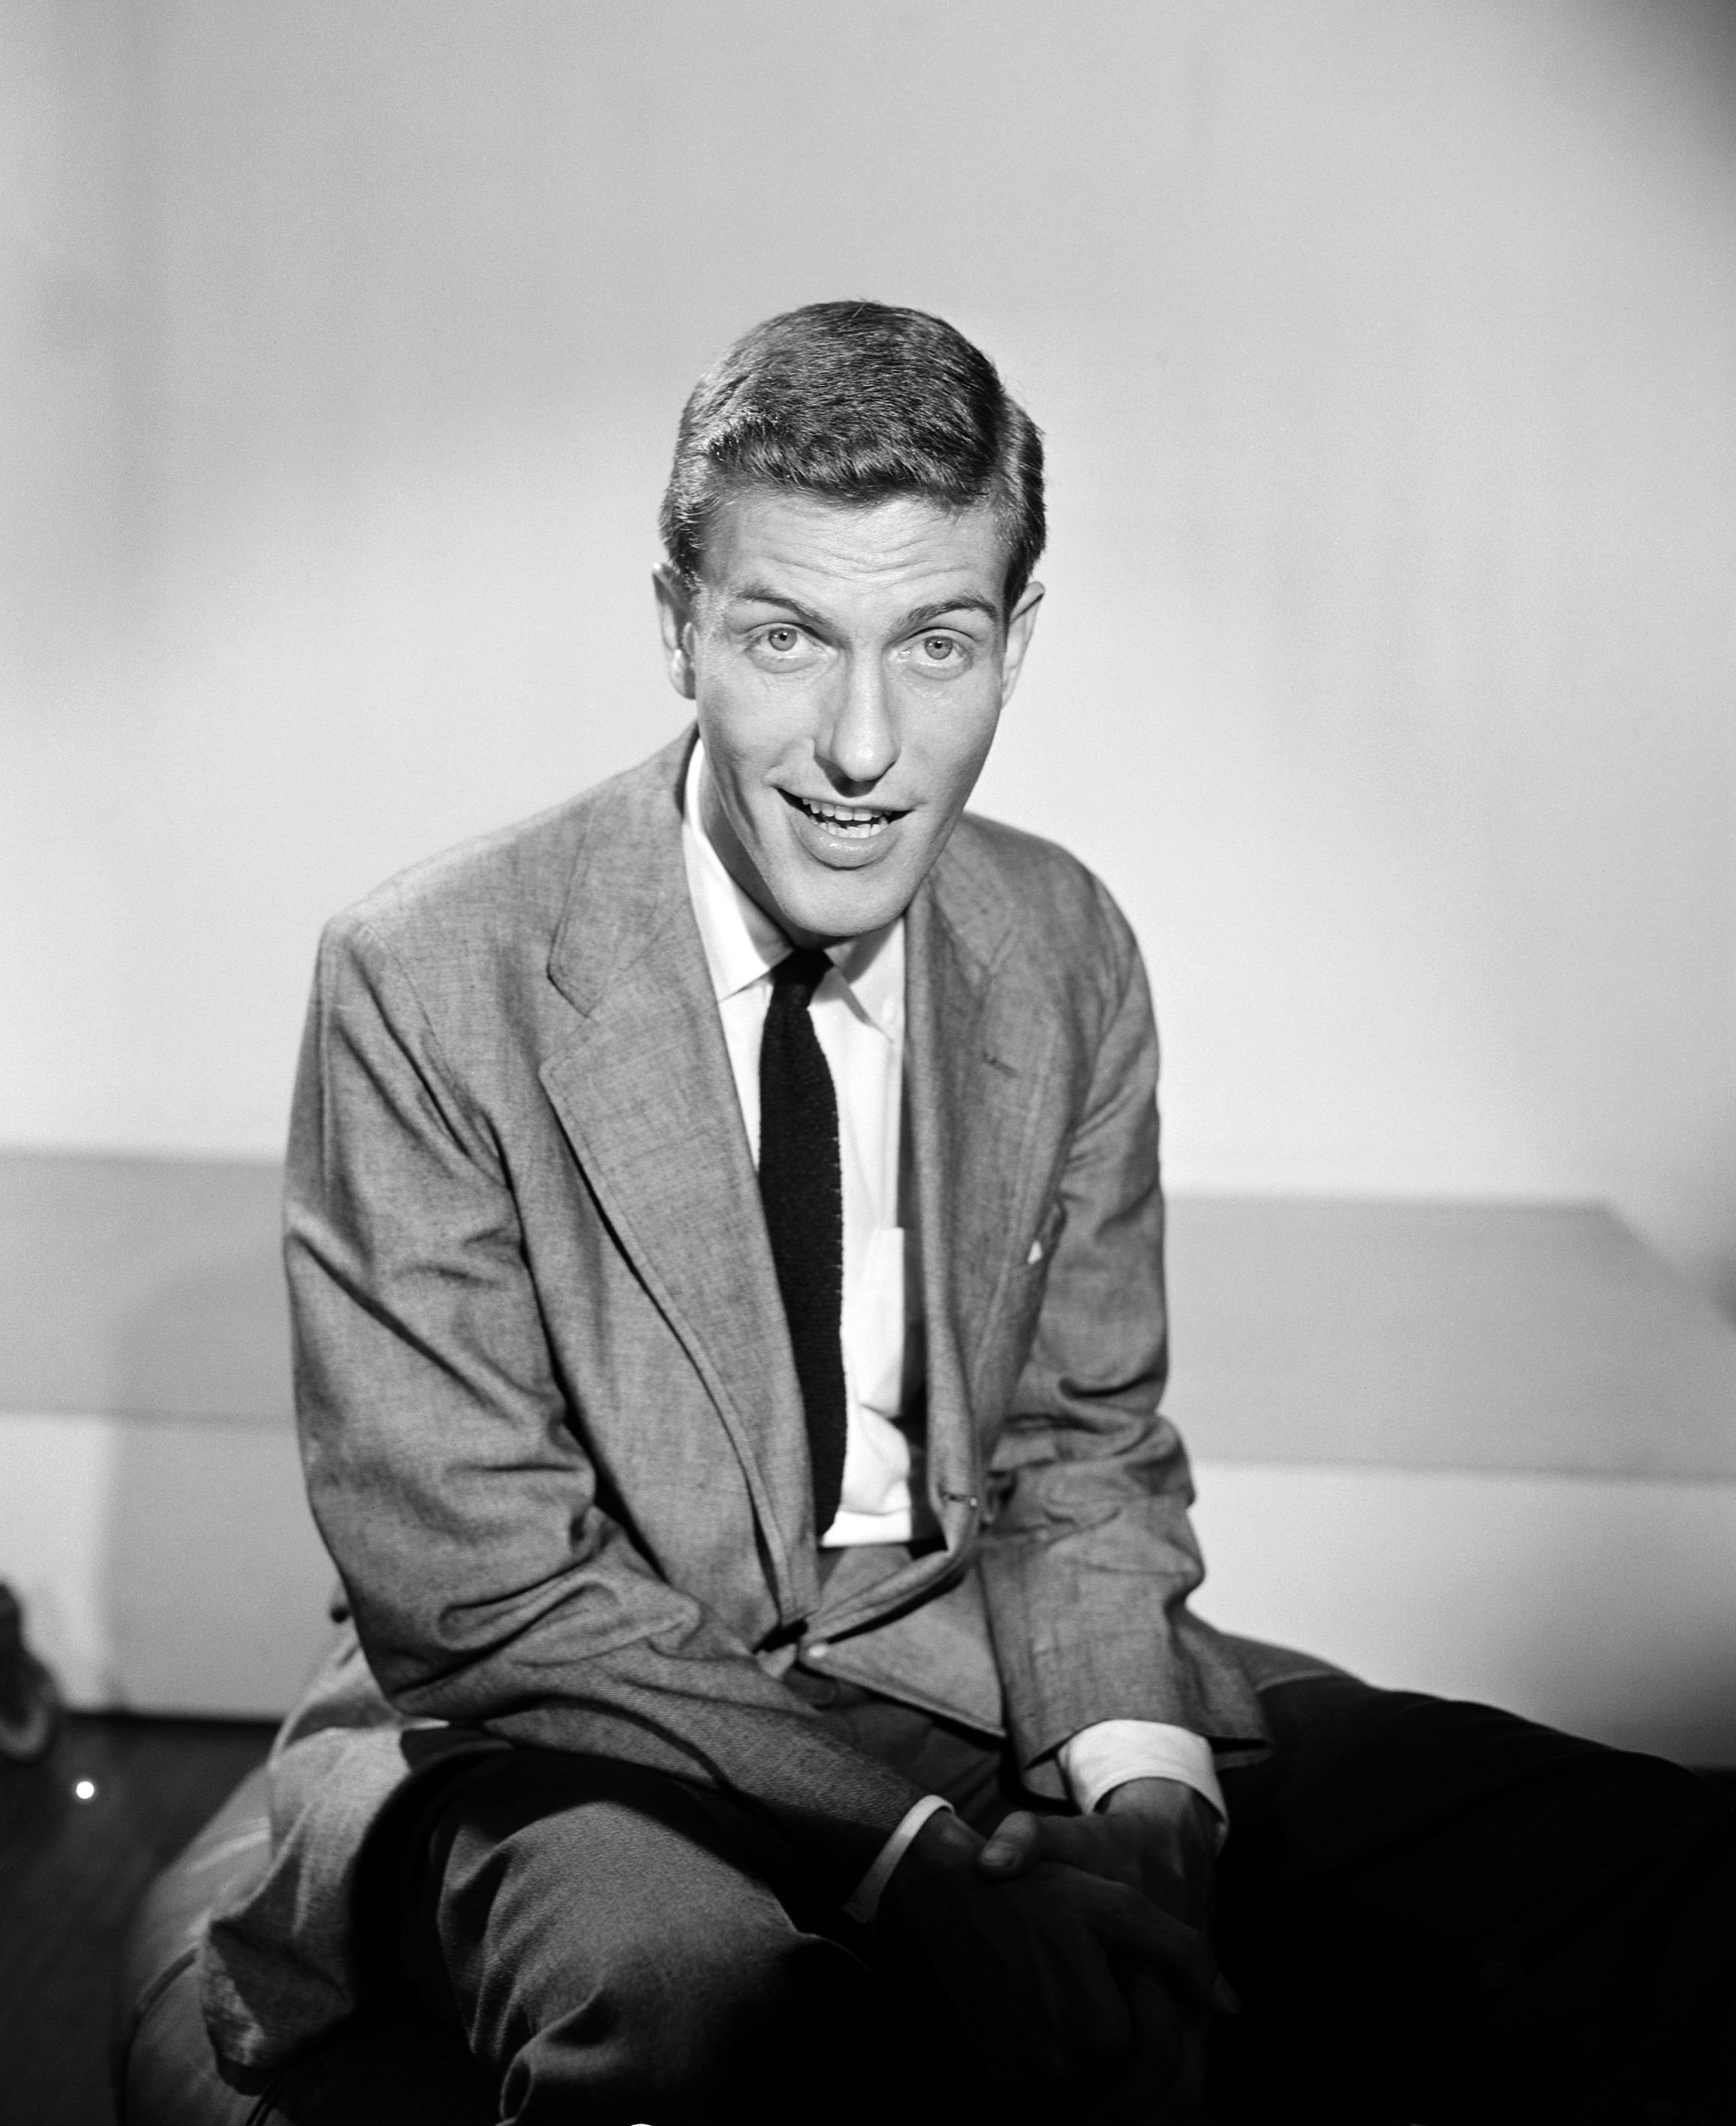 Dick Van Dyke on "The Morning Show" in New York on July 11, 1955. | Source: CBS/Getty Images